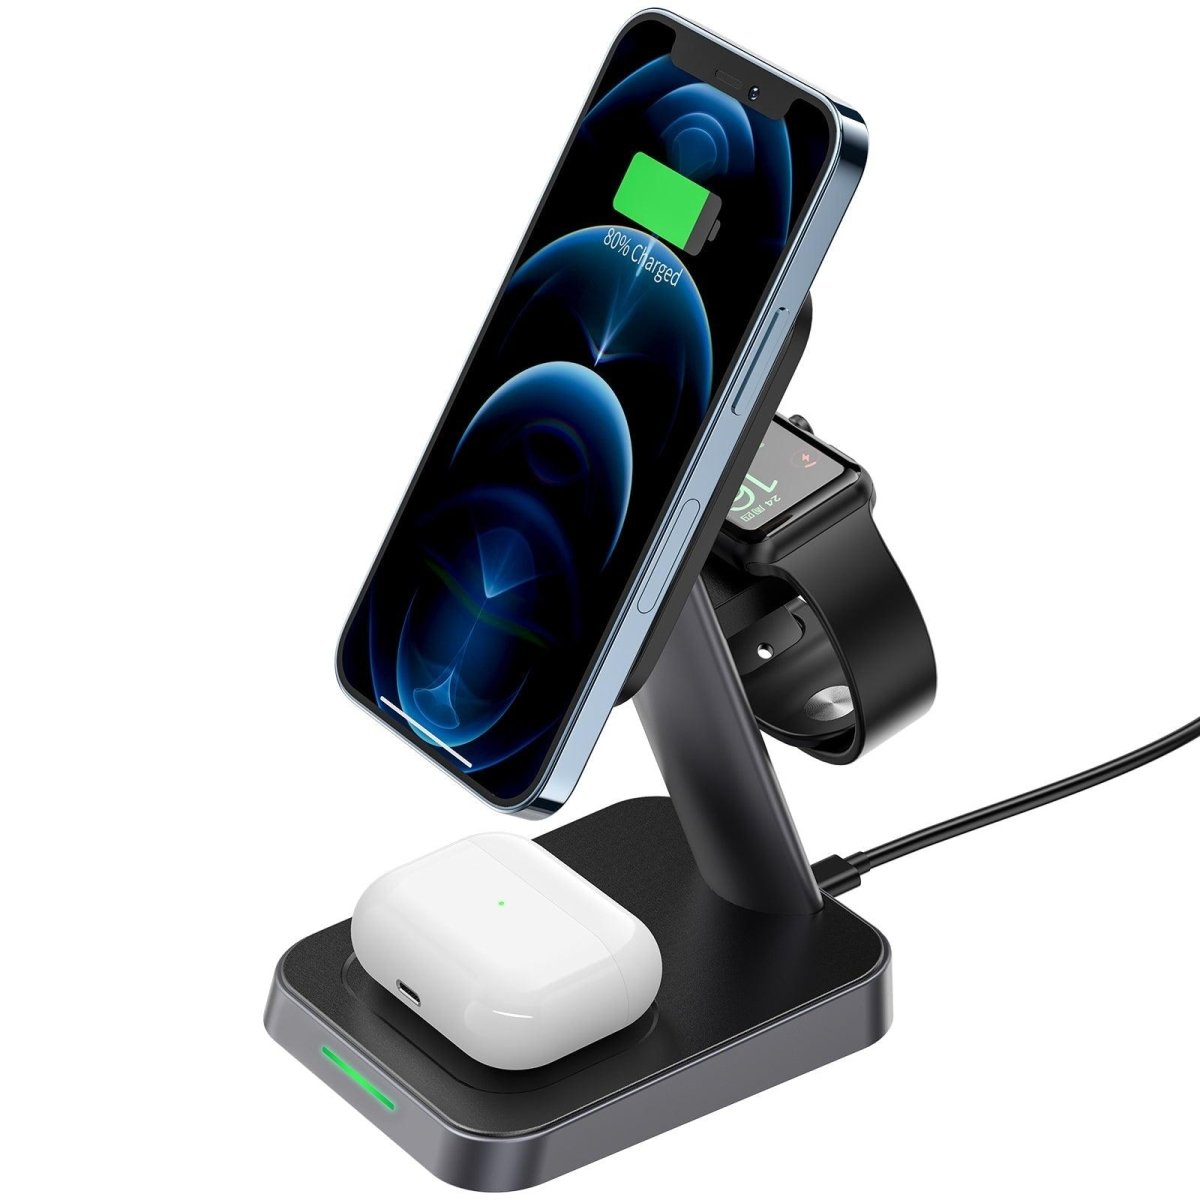 E3ACEFASTACEFAST 3in1 Magnetic Wireless Charger E3 - ACEFASTE3